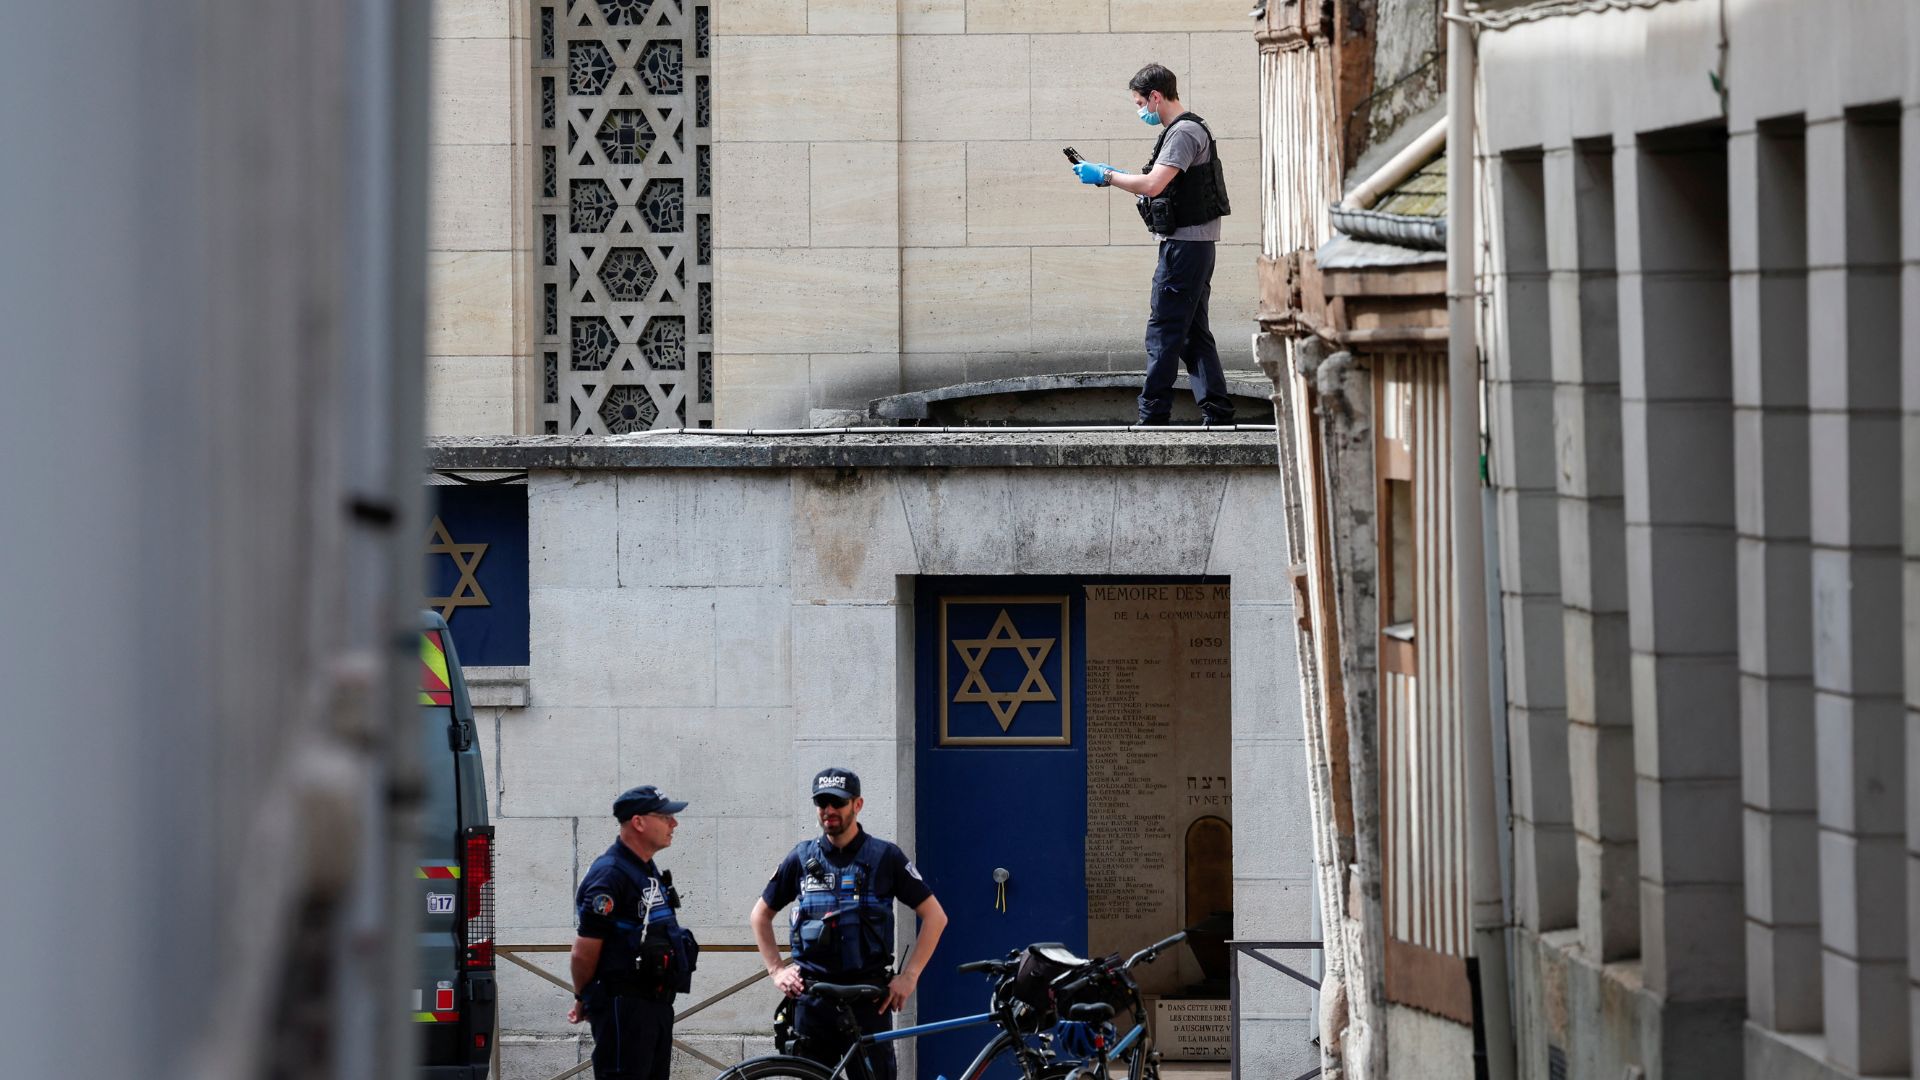 French police work in Rouen where officers shot dead an armed man who set fire to a synagogue. /Gonzalo Fuentes/Reuters